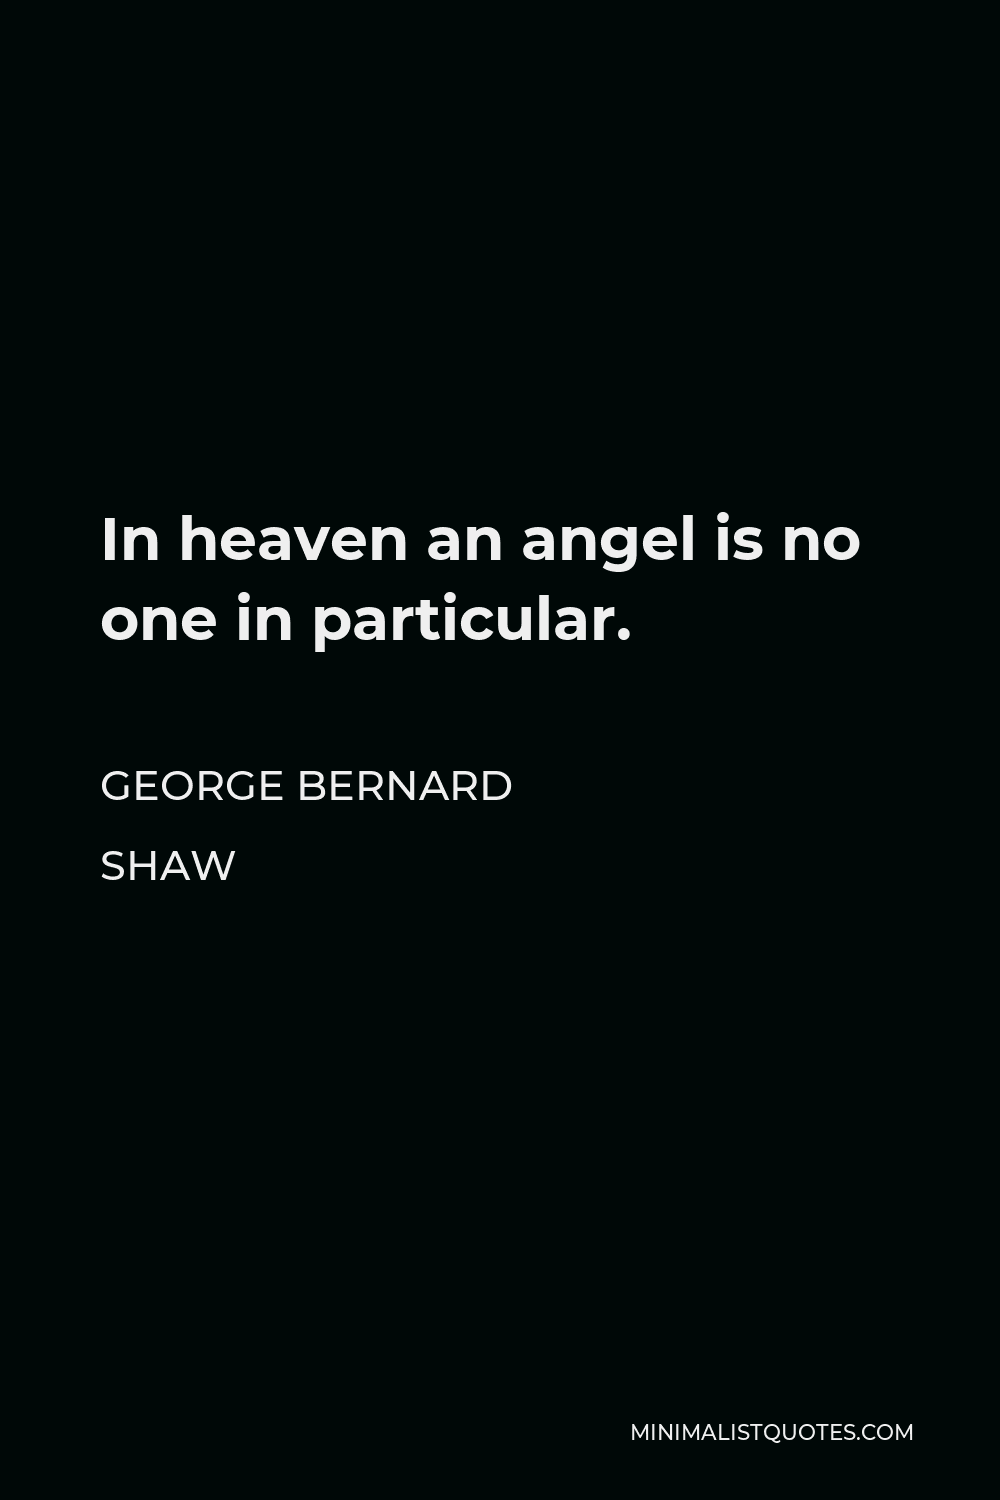 George Bernard Shaw Quote - In heaven an angel is no one in particular.